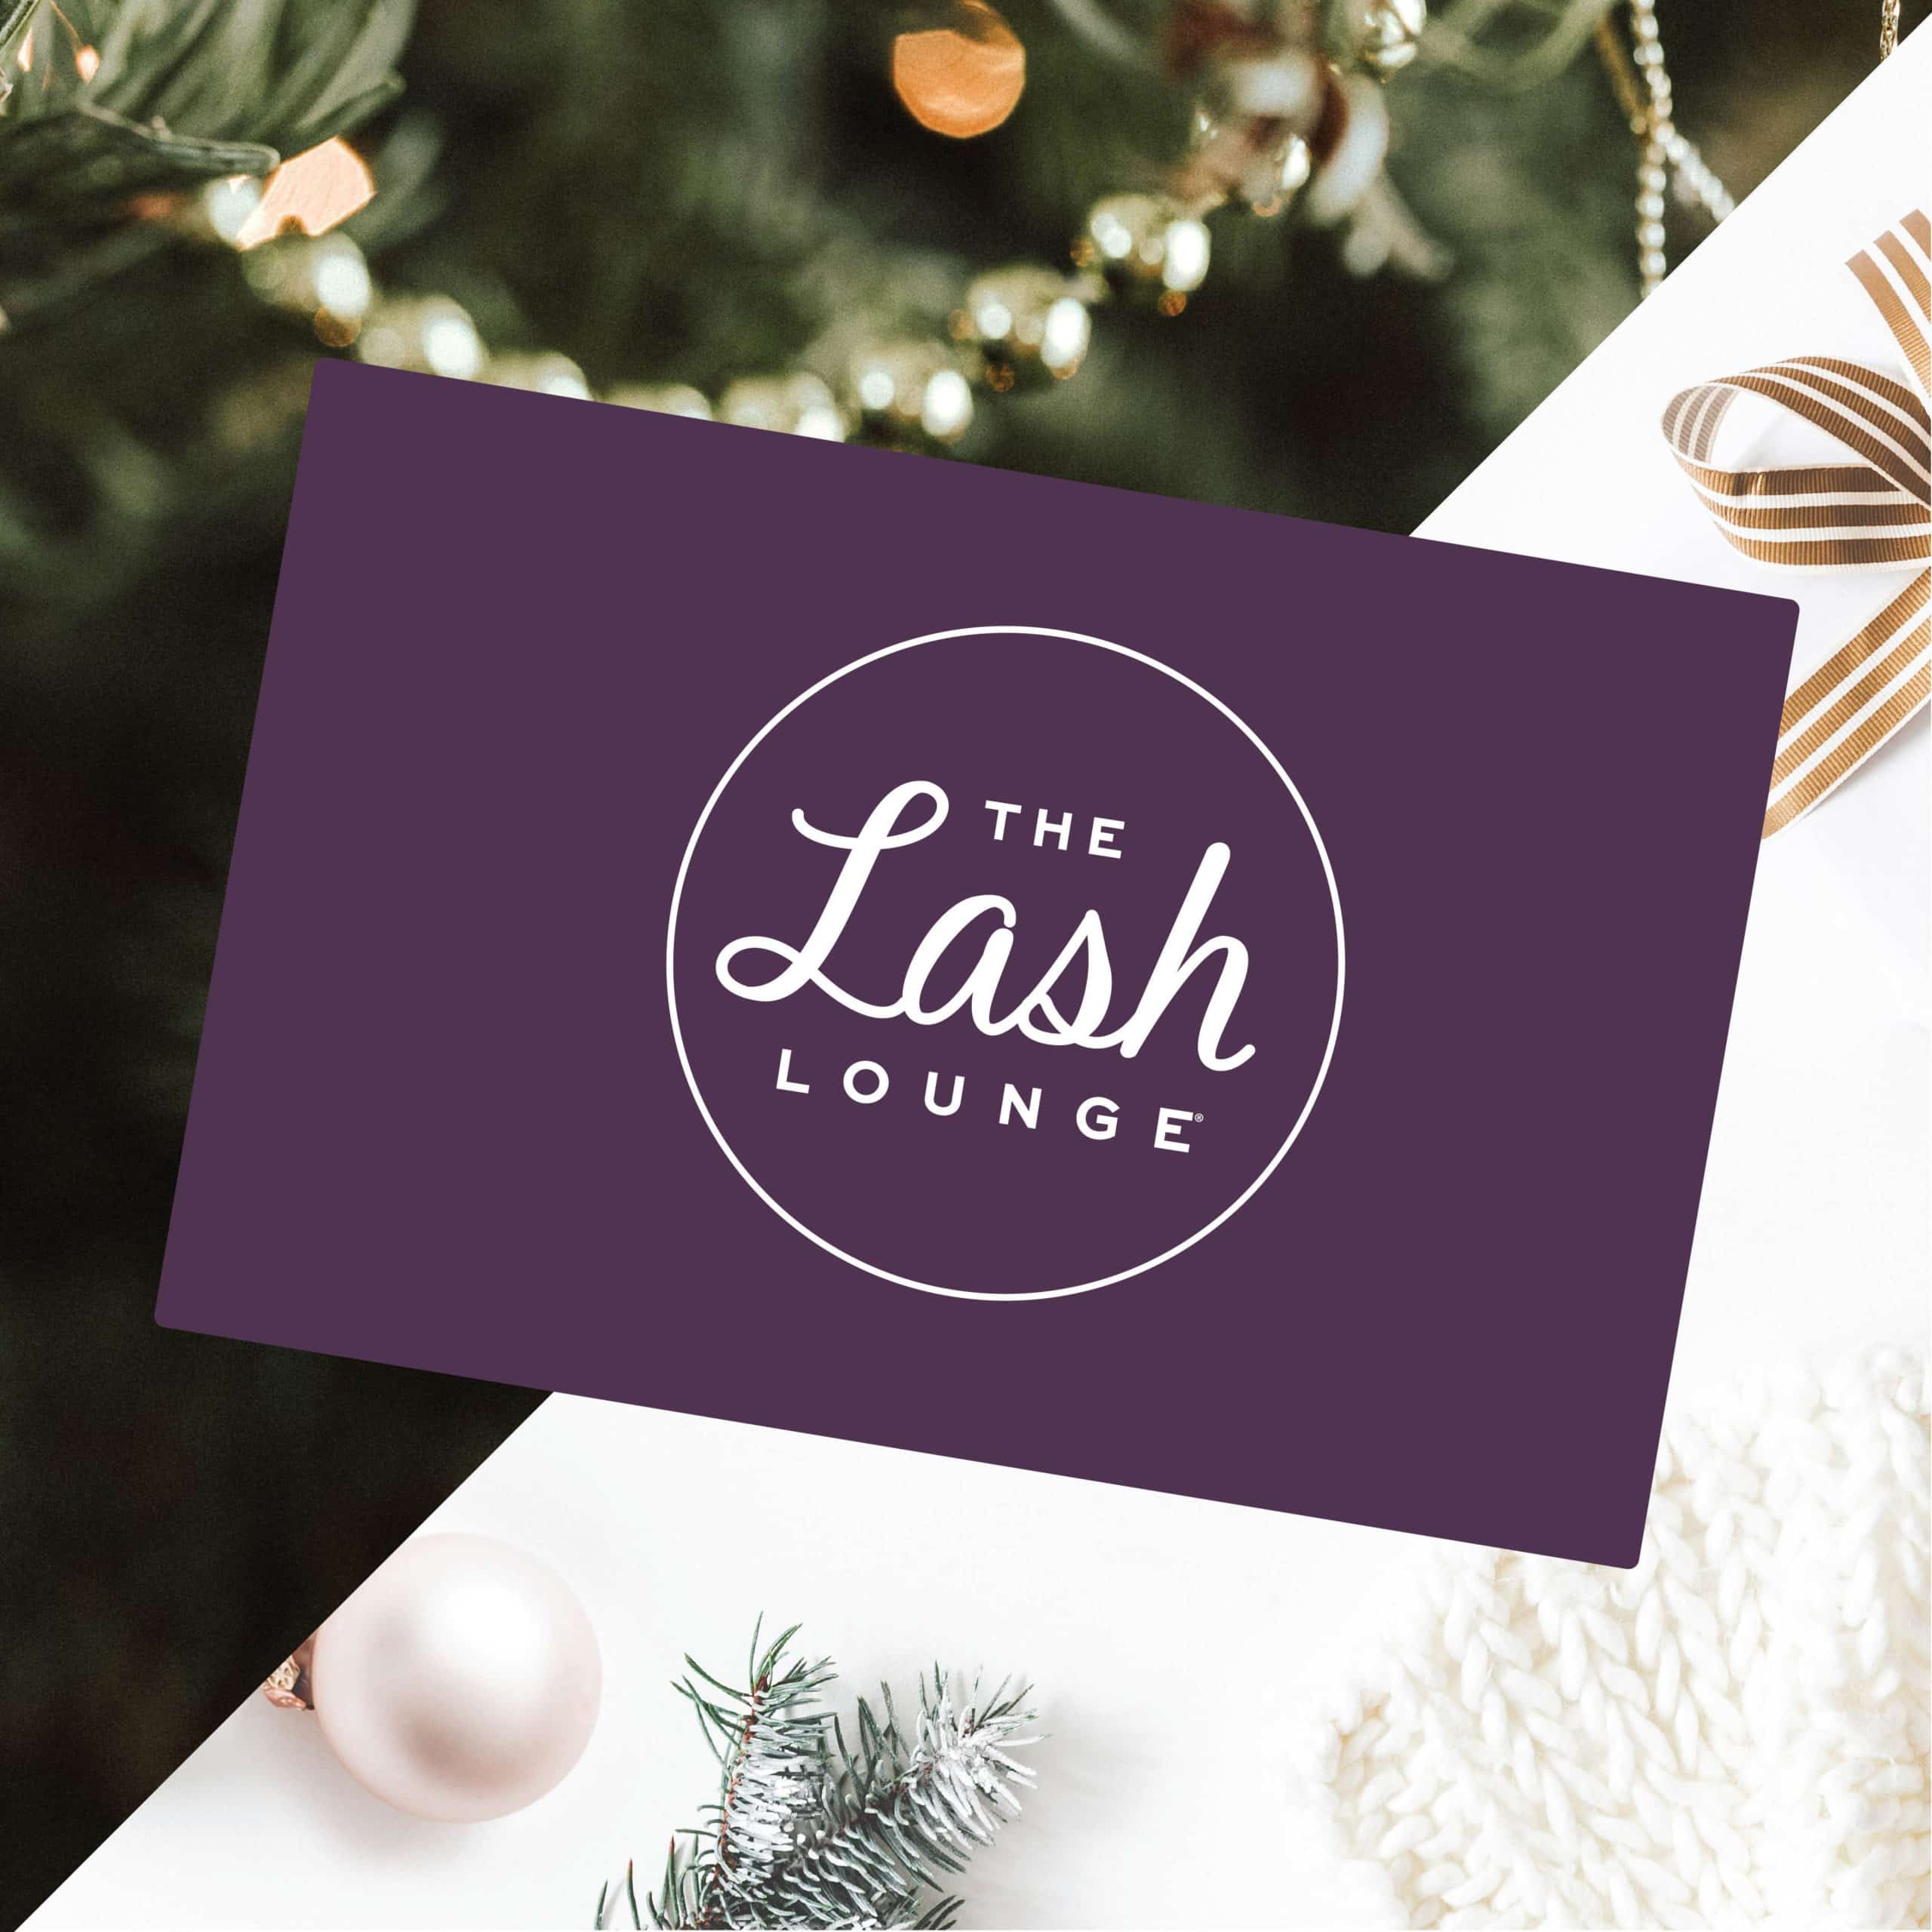 A holiday gift card to The Lash Lounge for lash and brow services